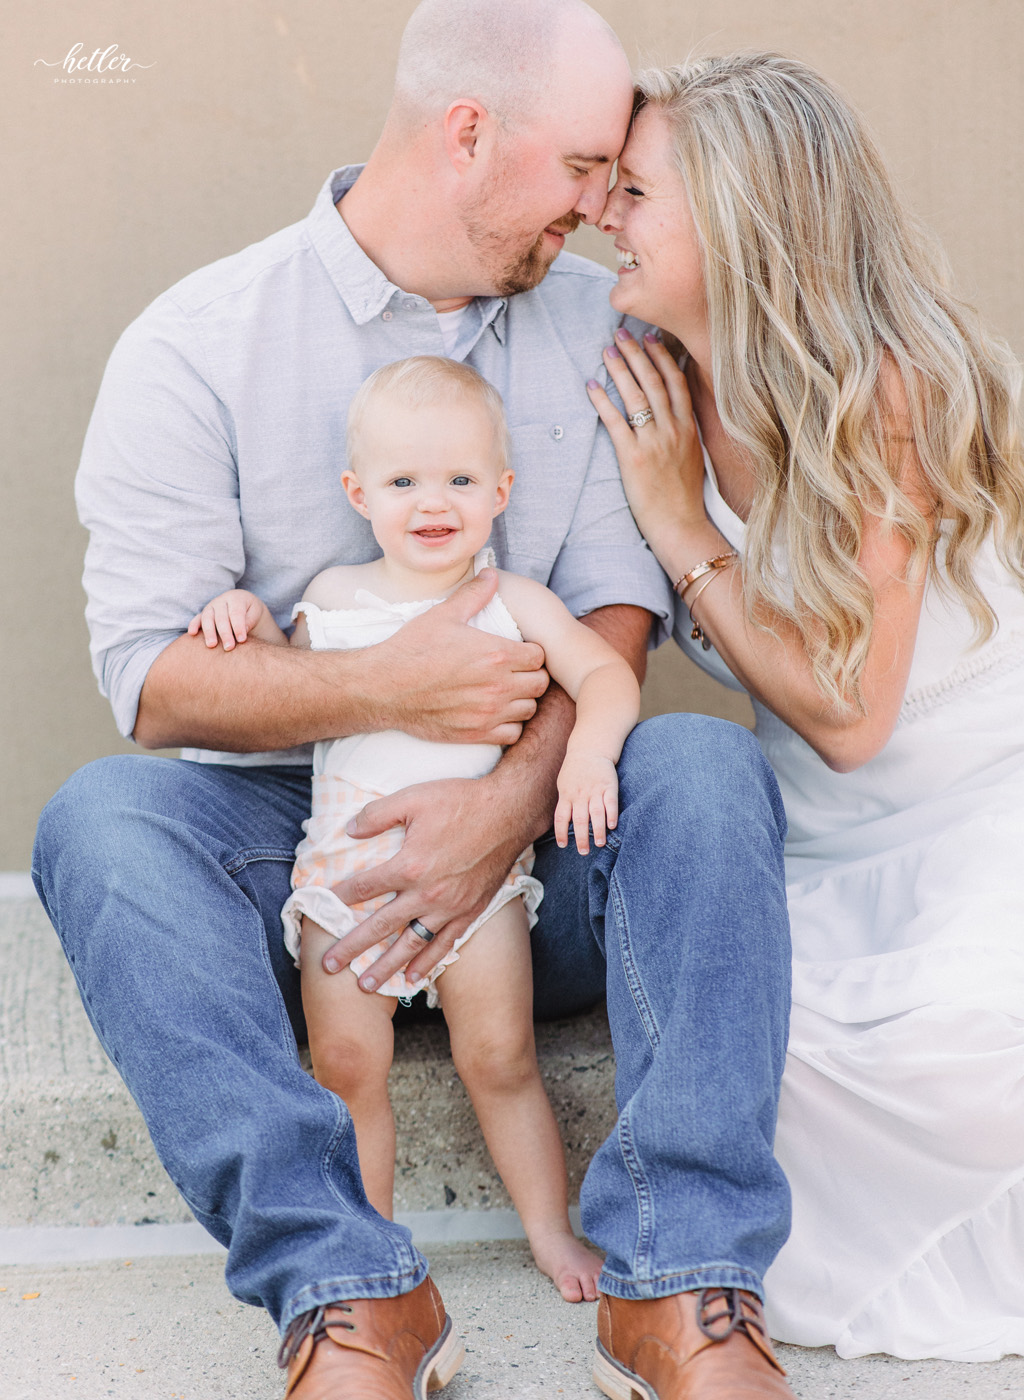 A downtown Grand Rapids family photo session with a light and airy style at the Grand Rapids Art Museum